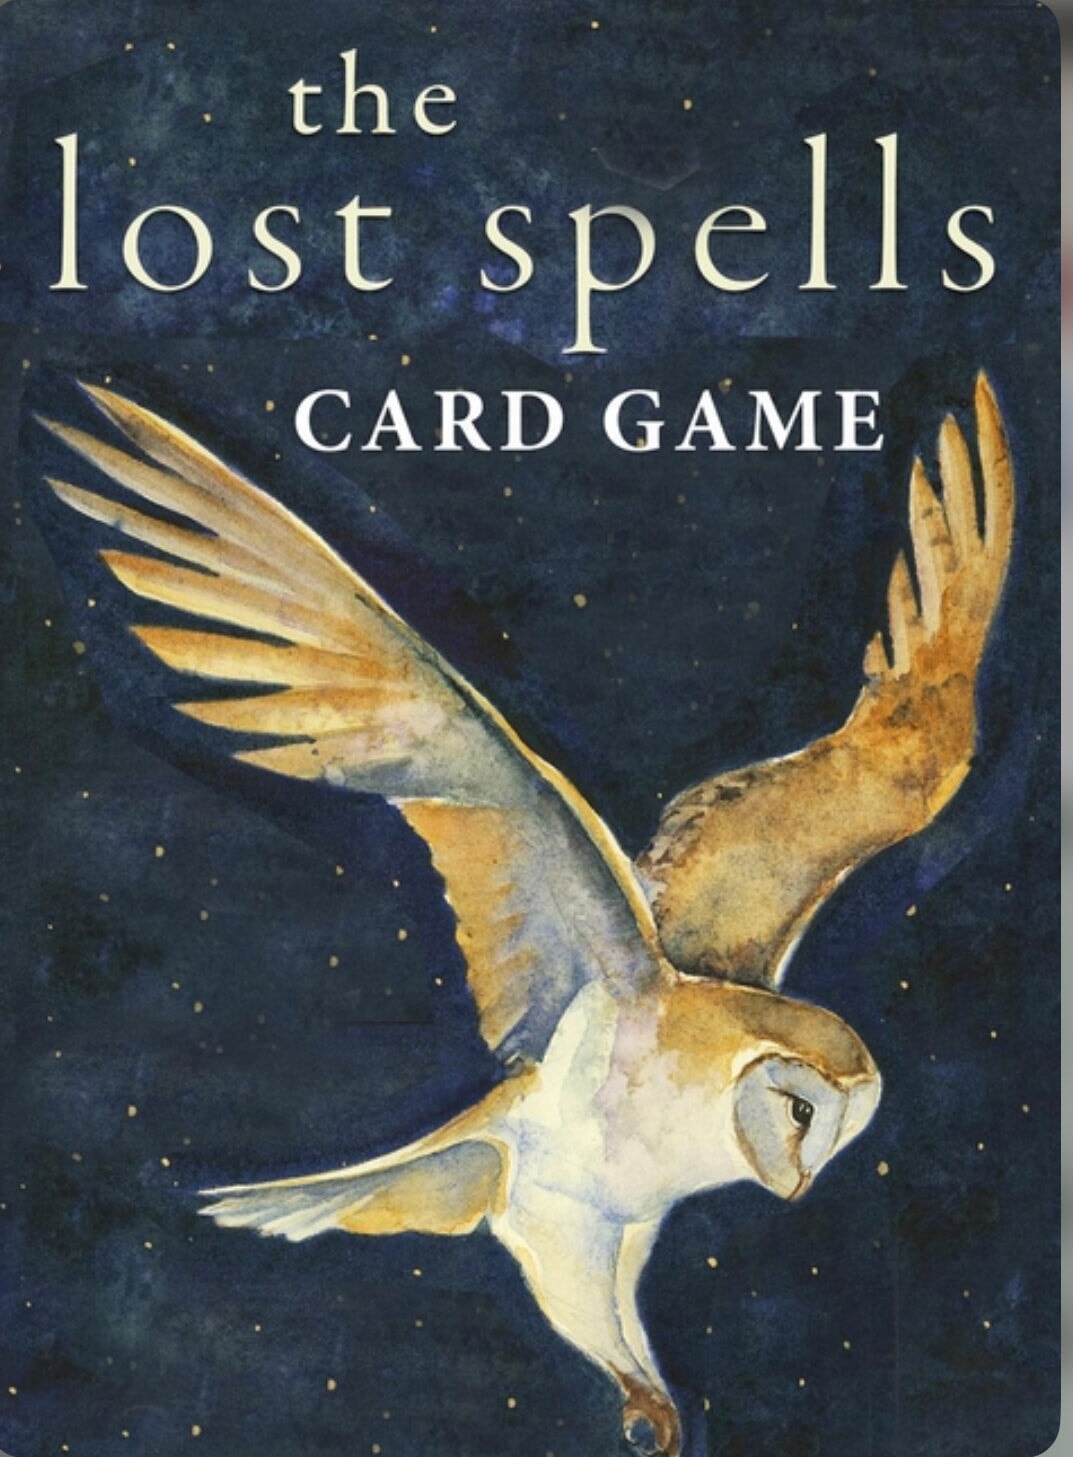 Card Game - The Lost Spells, A Family Card Game - Alder & Alouette